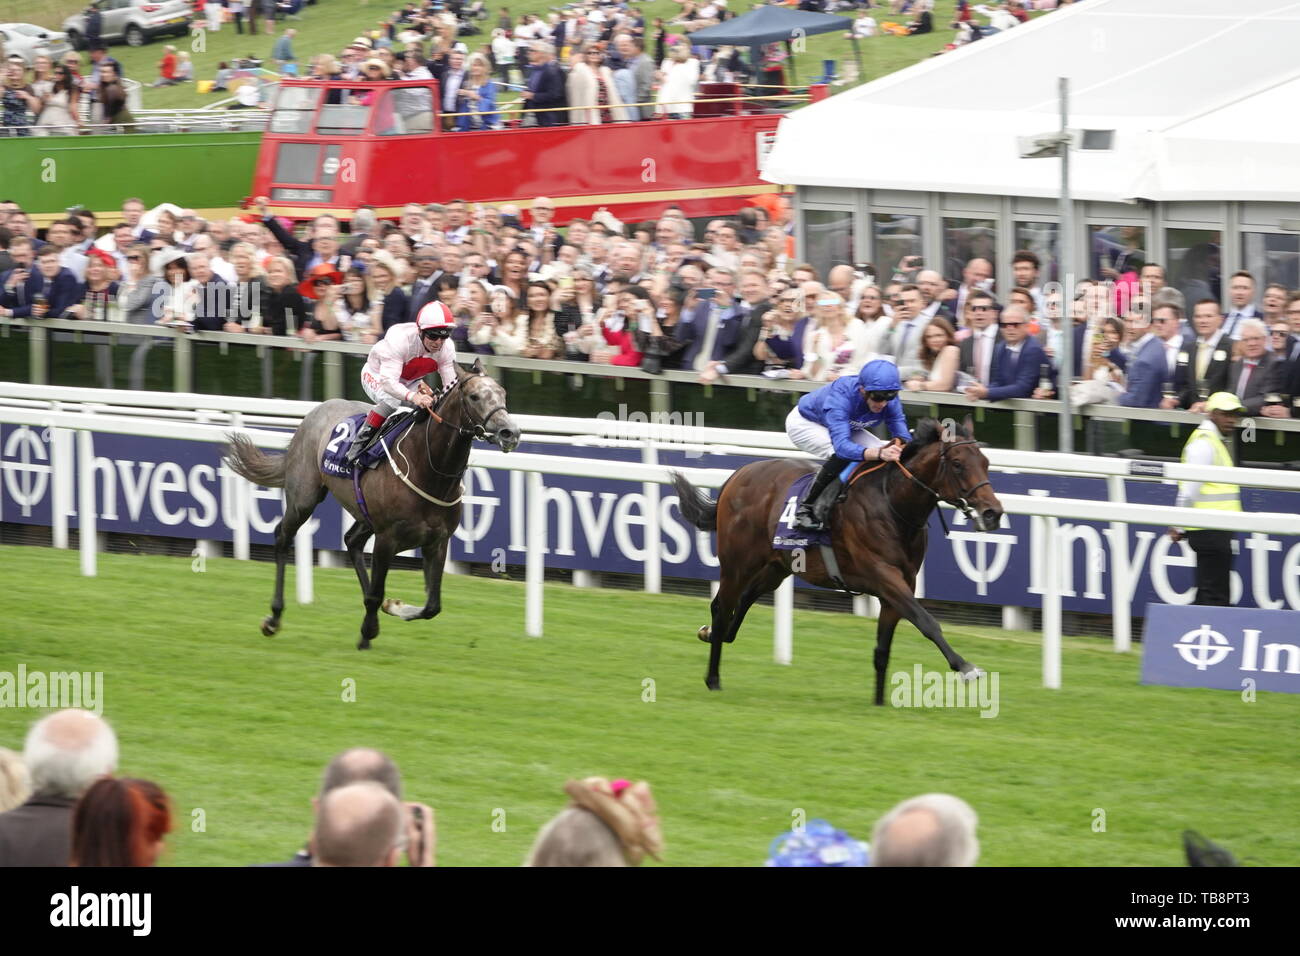 Epsom Downs, Surrey, UK. 31st May, 2019. Pinatubo beats Misty grey in the first race The Investec Woocote Stakes at the Investec Derby Festival - on Ladies Day, classic horse race. Credit: Motofoto/Alamy Live News Stock Photo